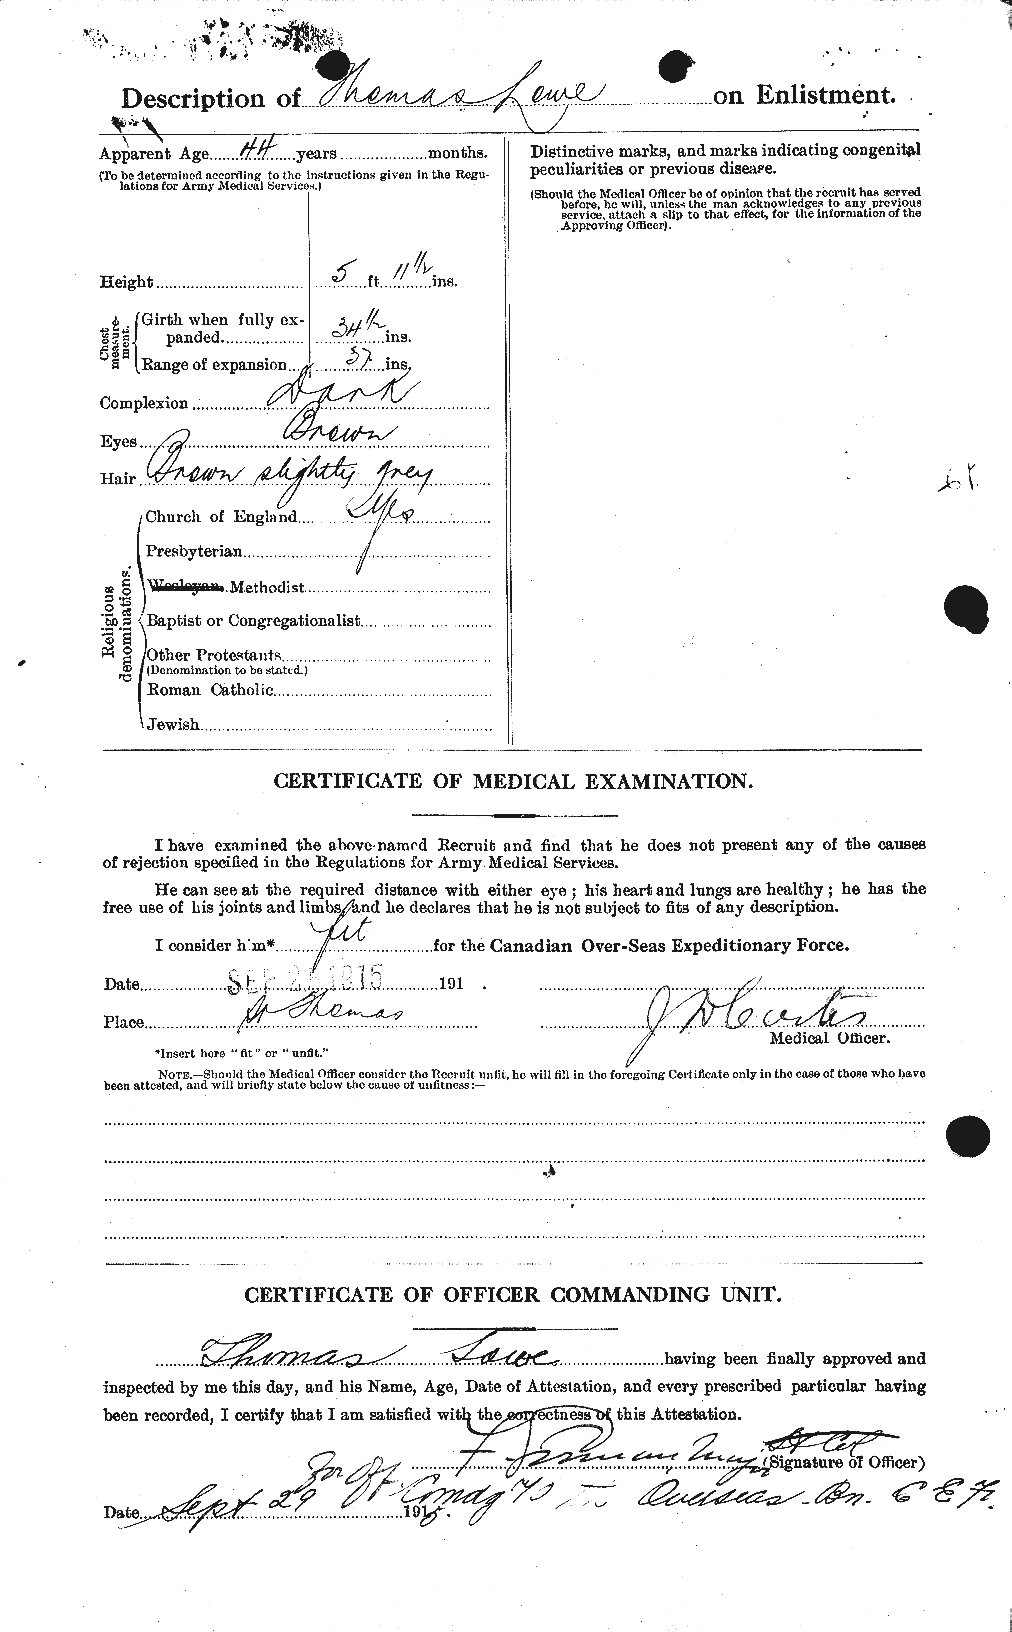 Personnel Records of the First World War - CEF 469711b